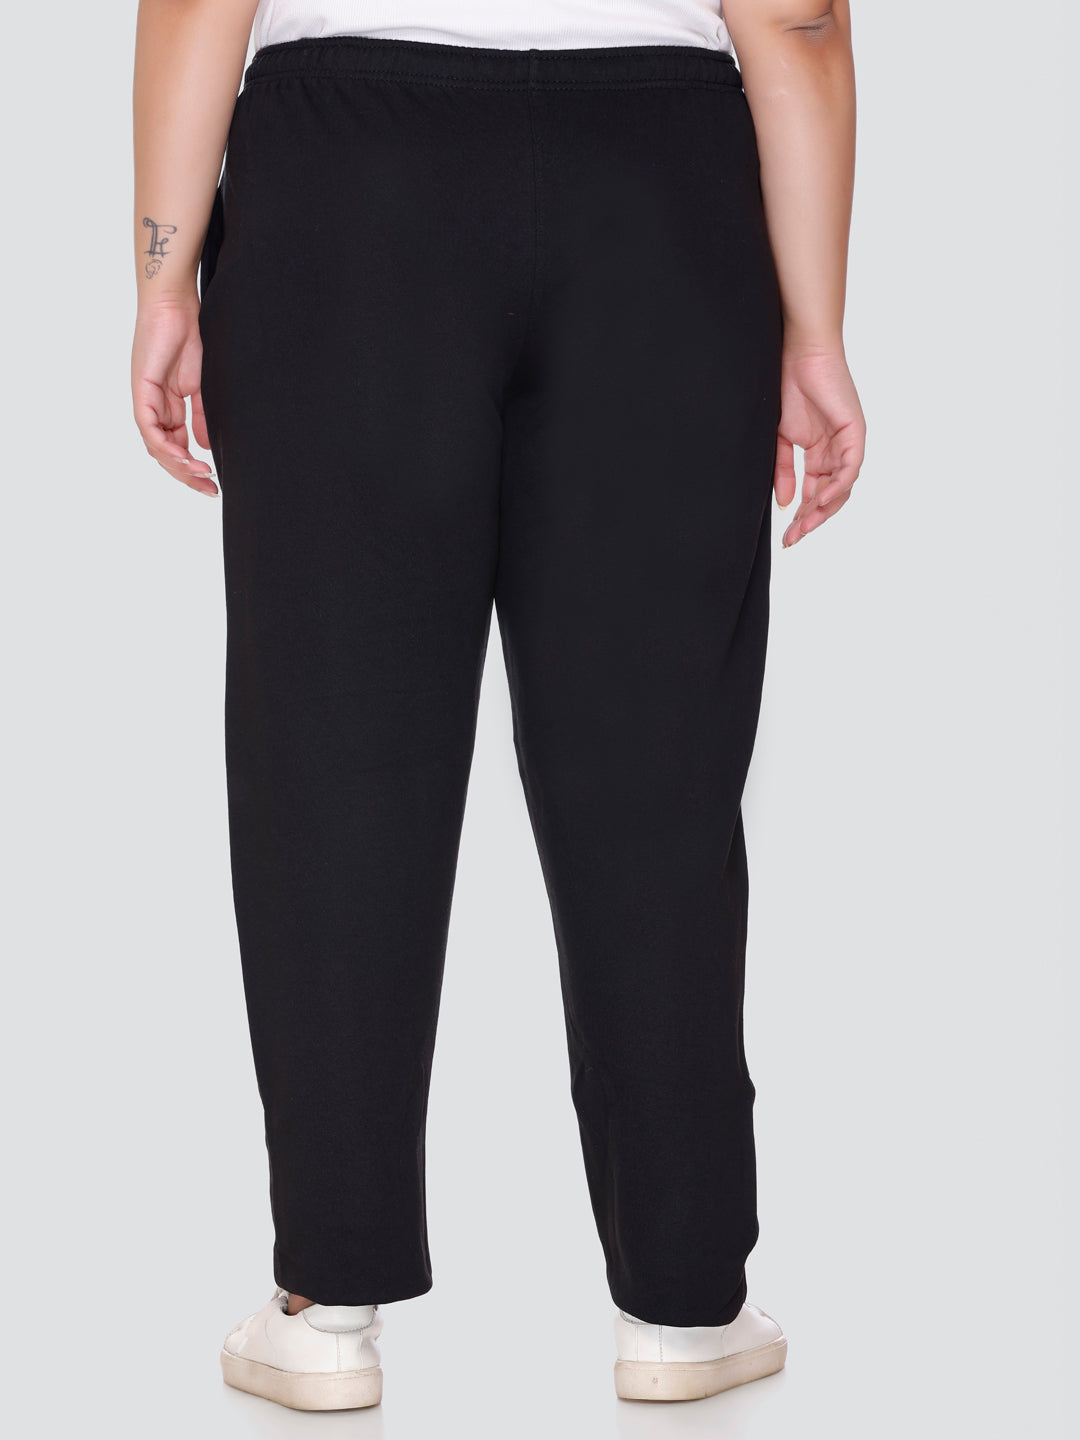 Stylish Black Cotton Winter Fleece Plus Size Track Pants For Women Online In India